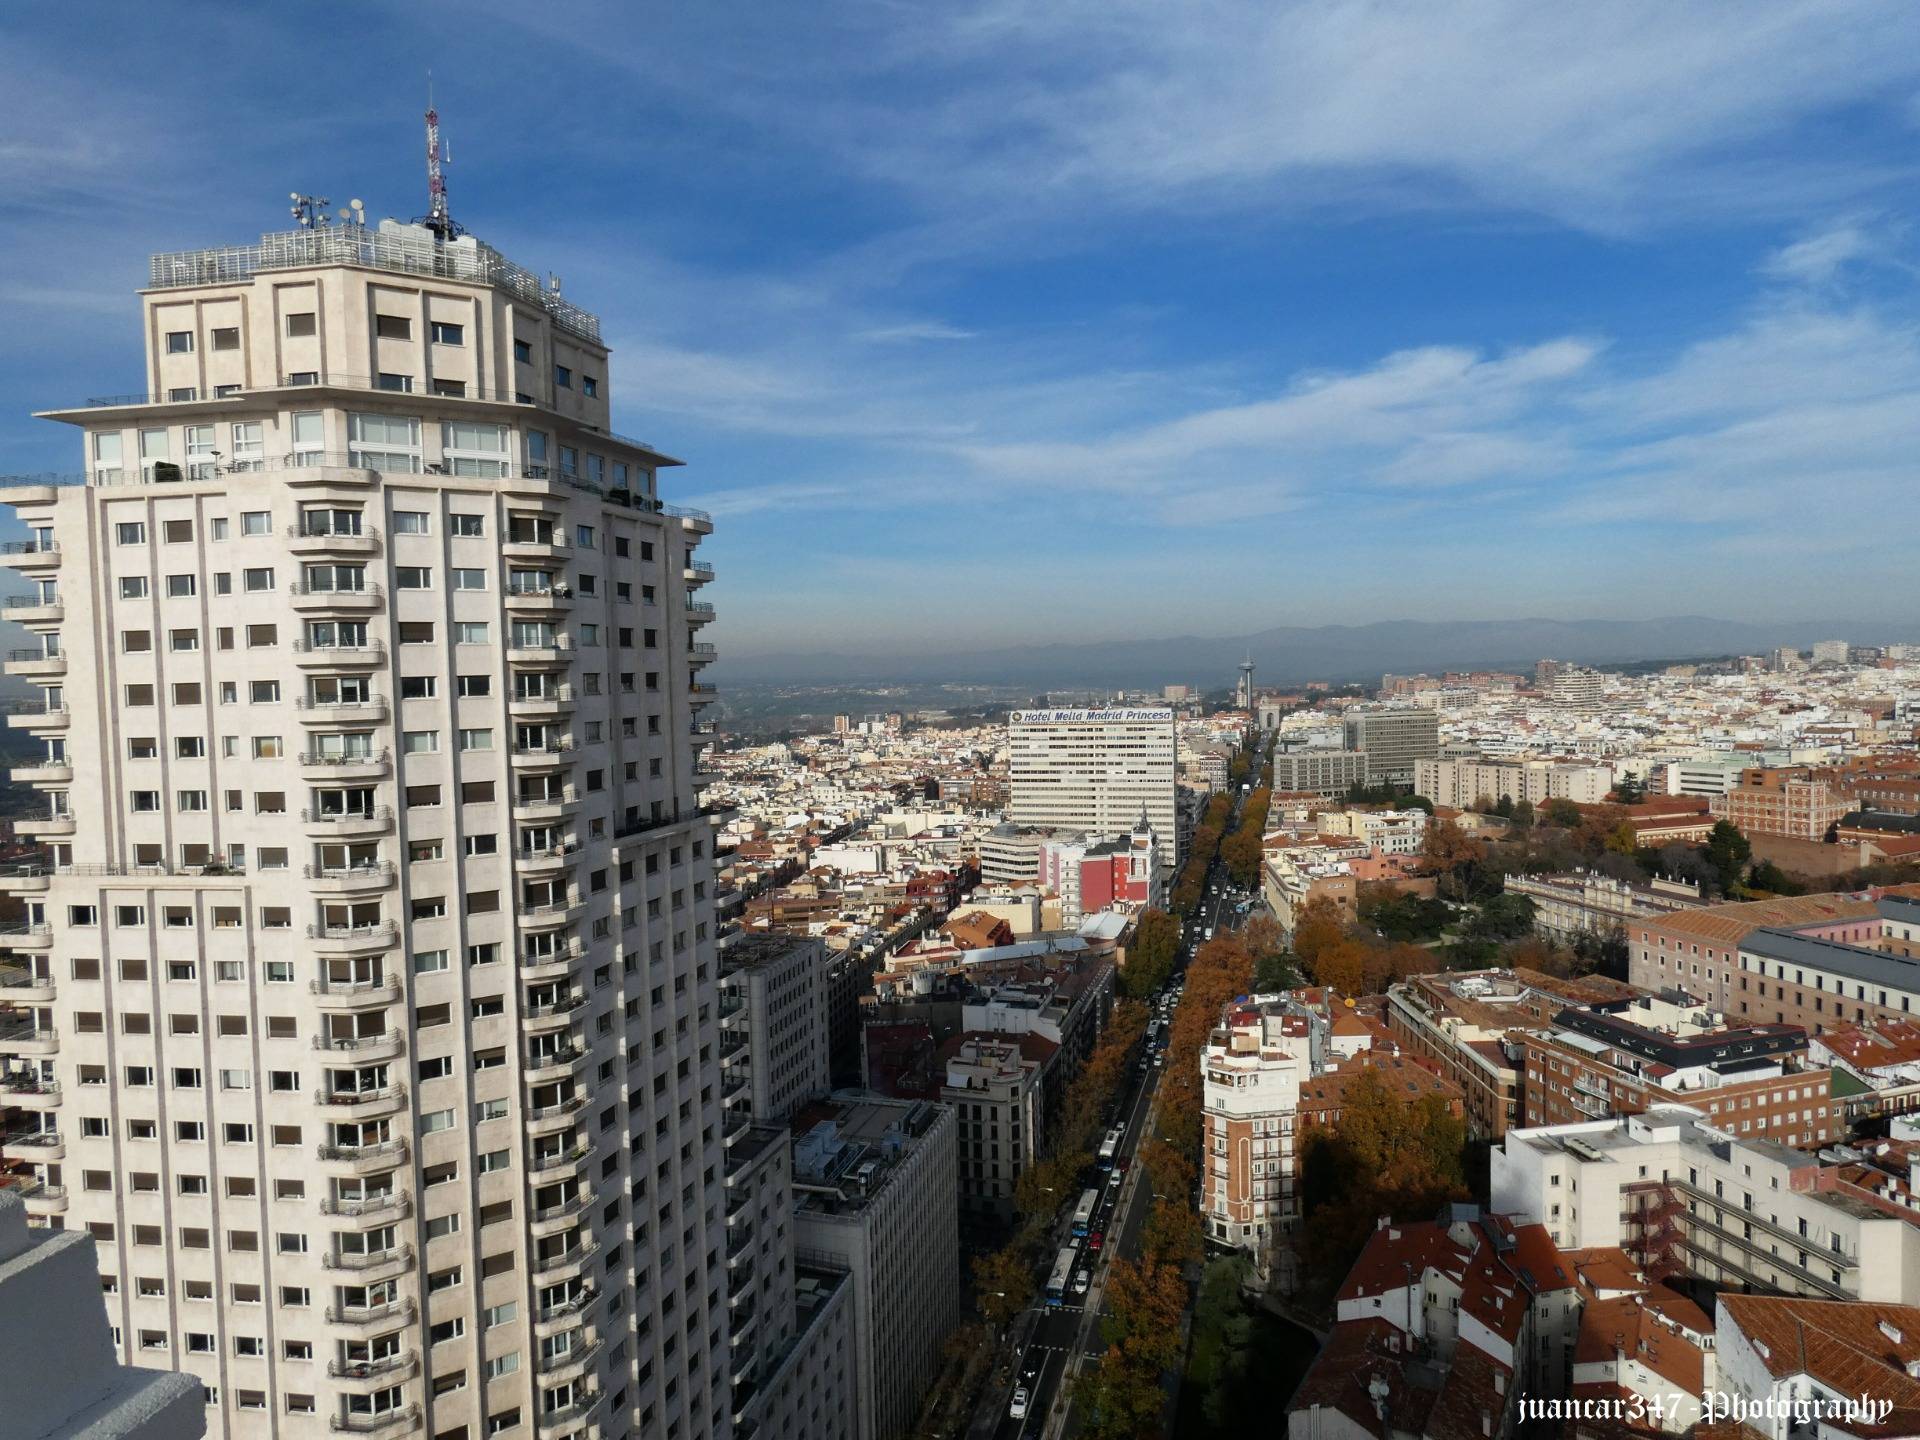 In the foreground, the grandiose Tower of Madrid